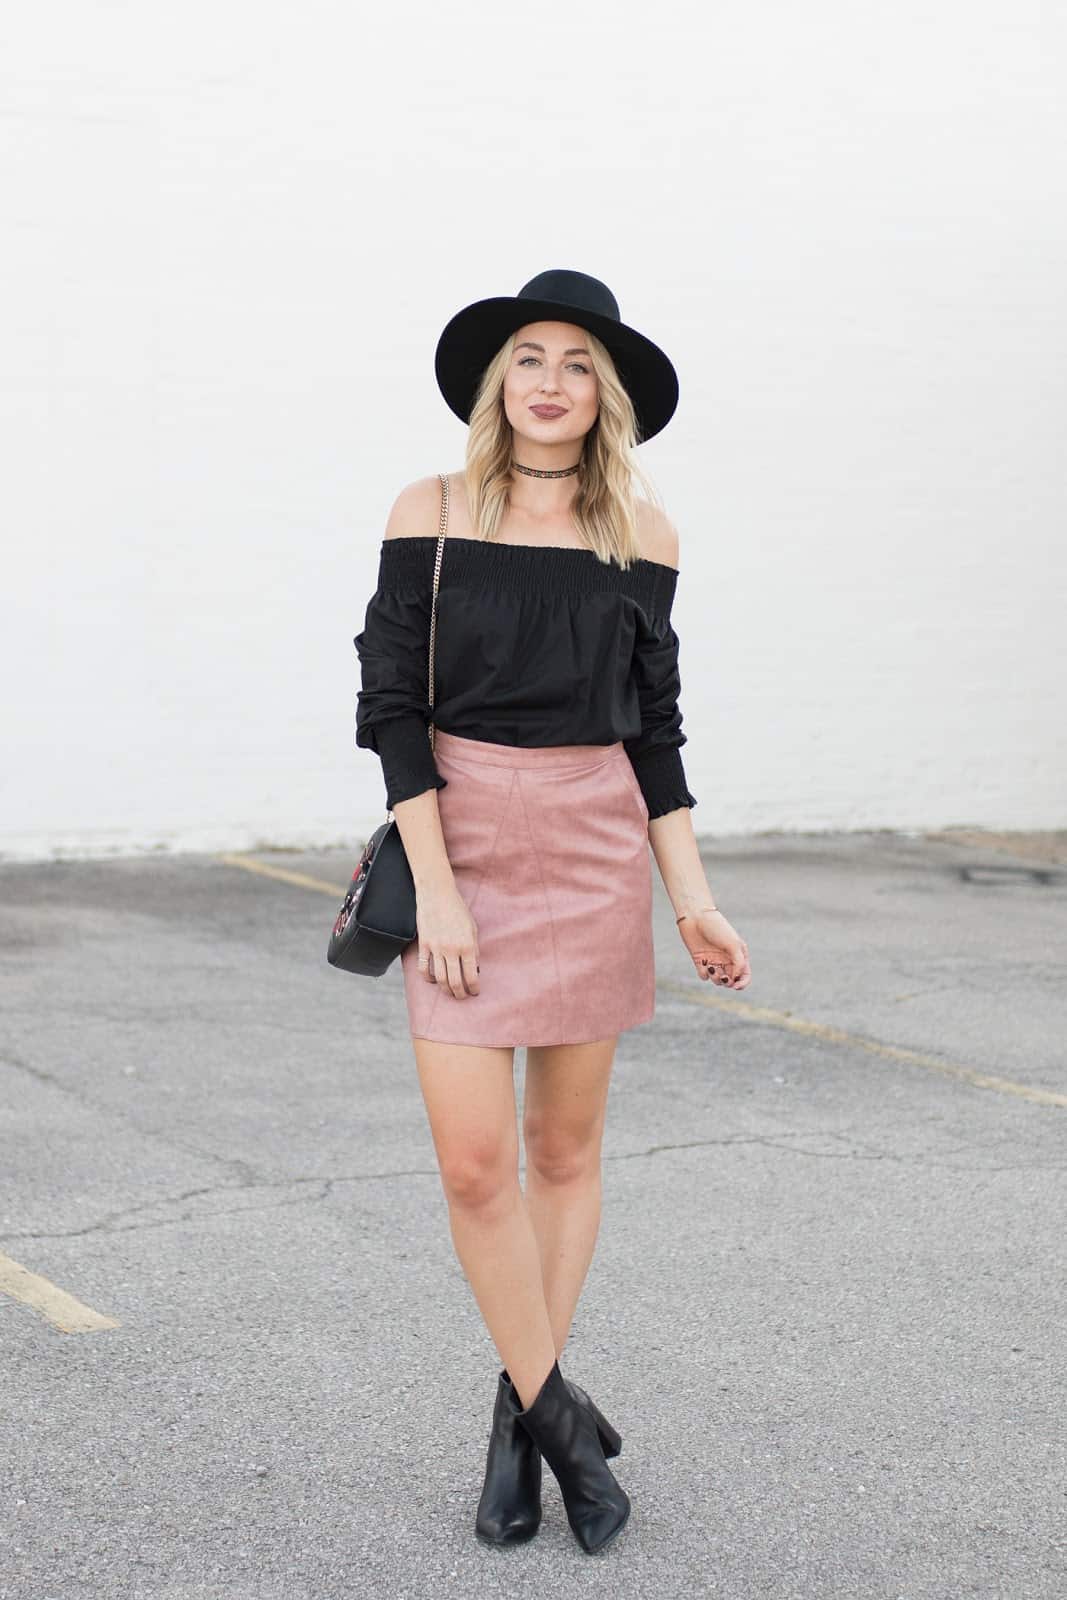 Pleather skirt and blouse